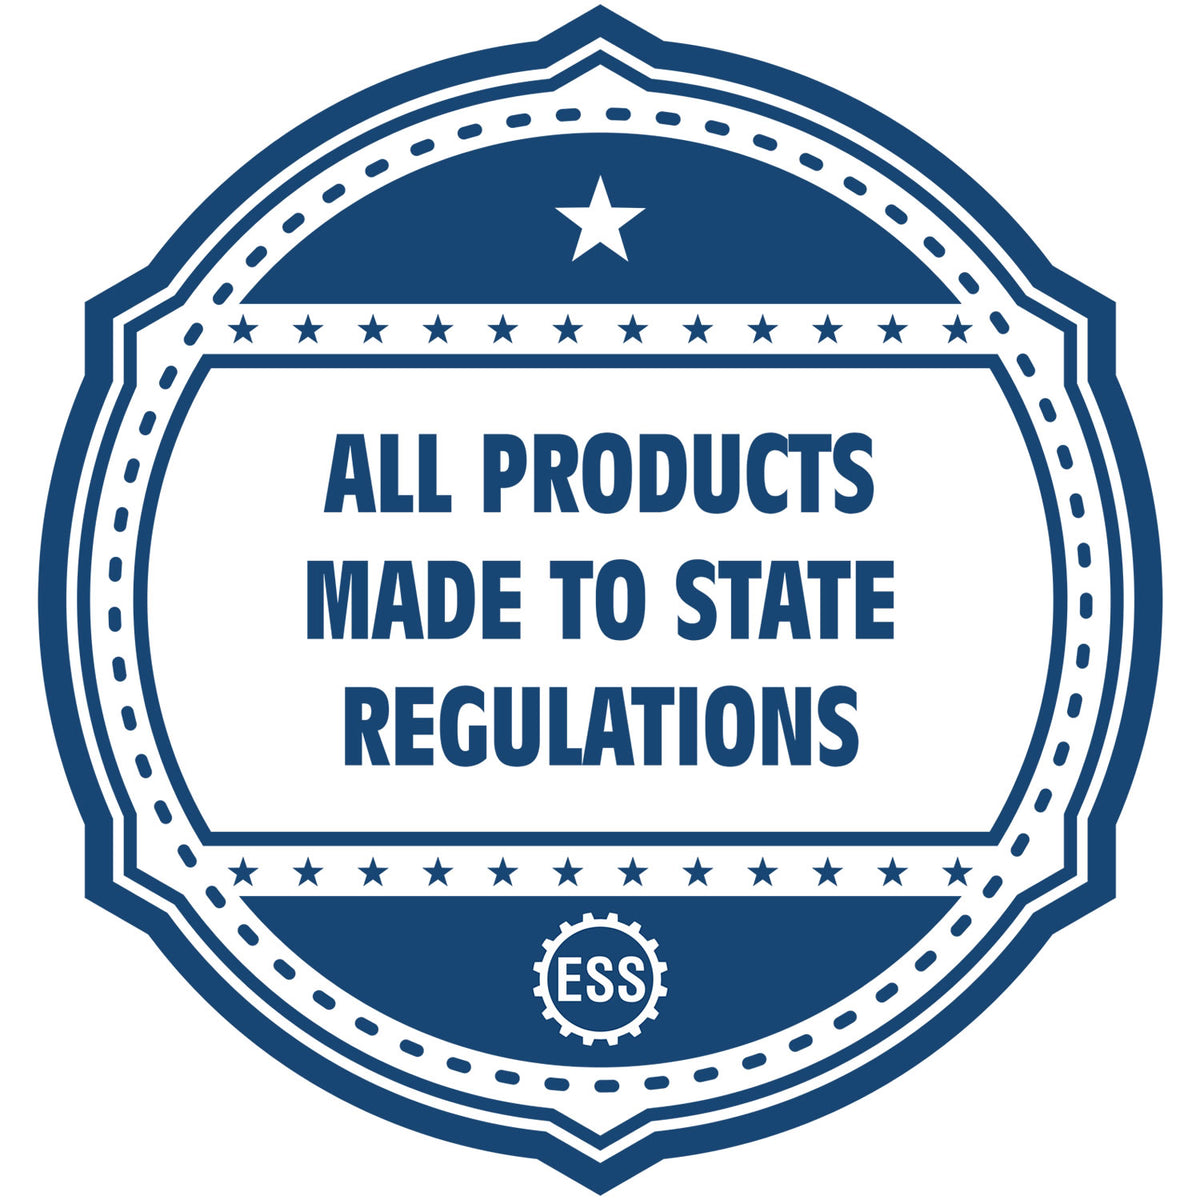 An icon or badge element for the Wooden Handle Maryland Rectangular Notary Public Stamp showing that this product is made in compliance with state regulations.